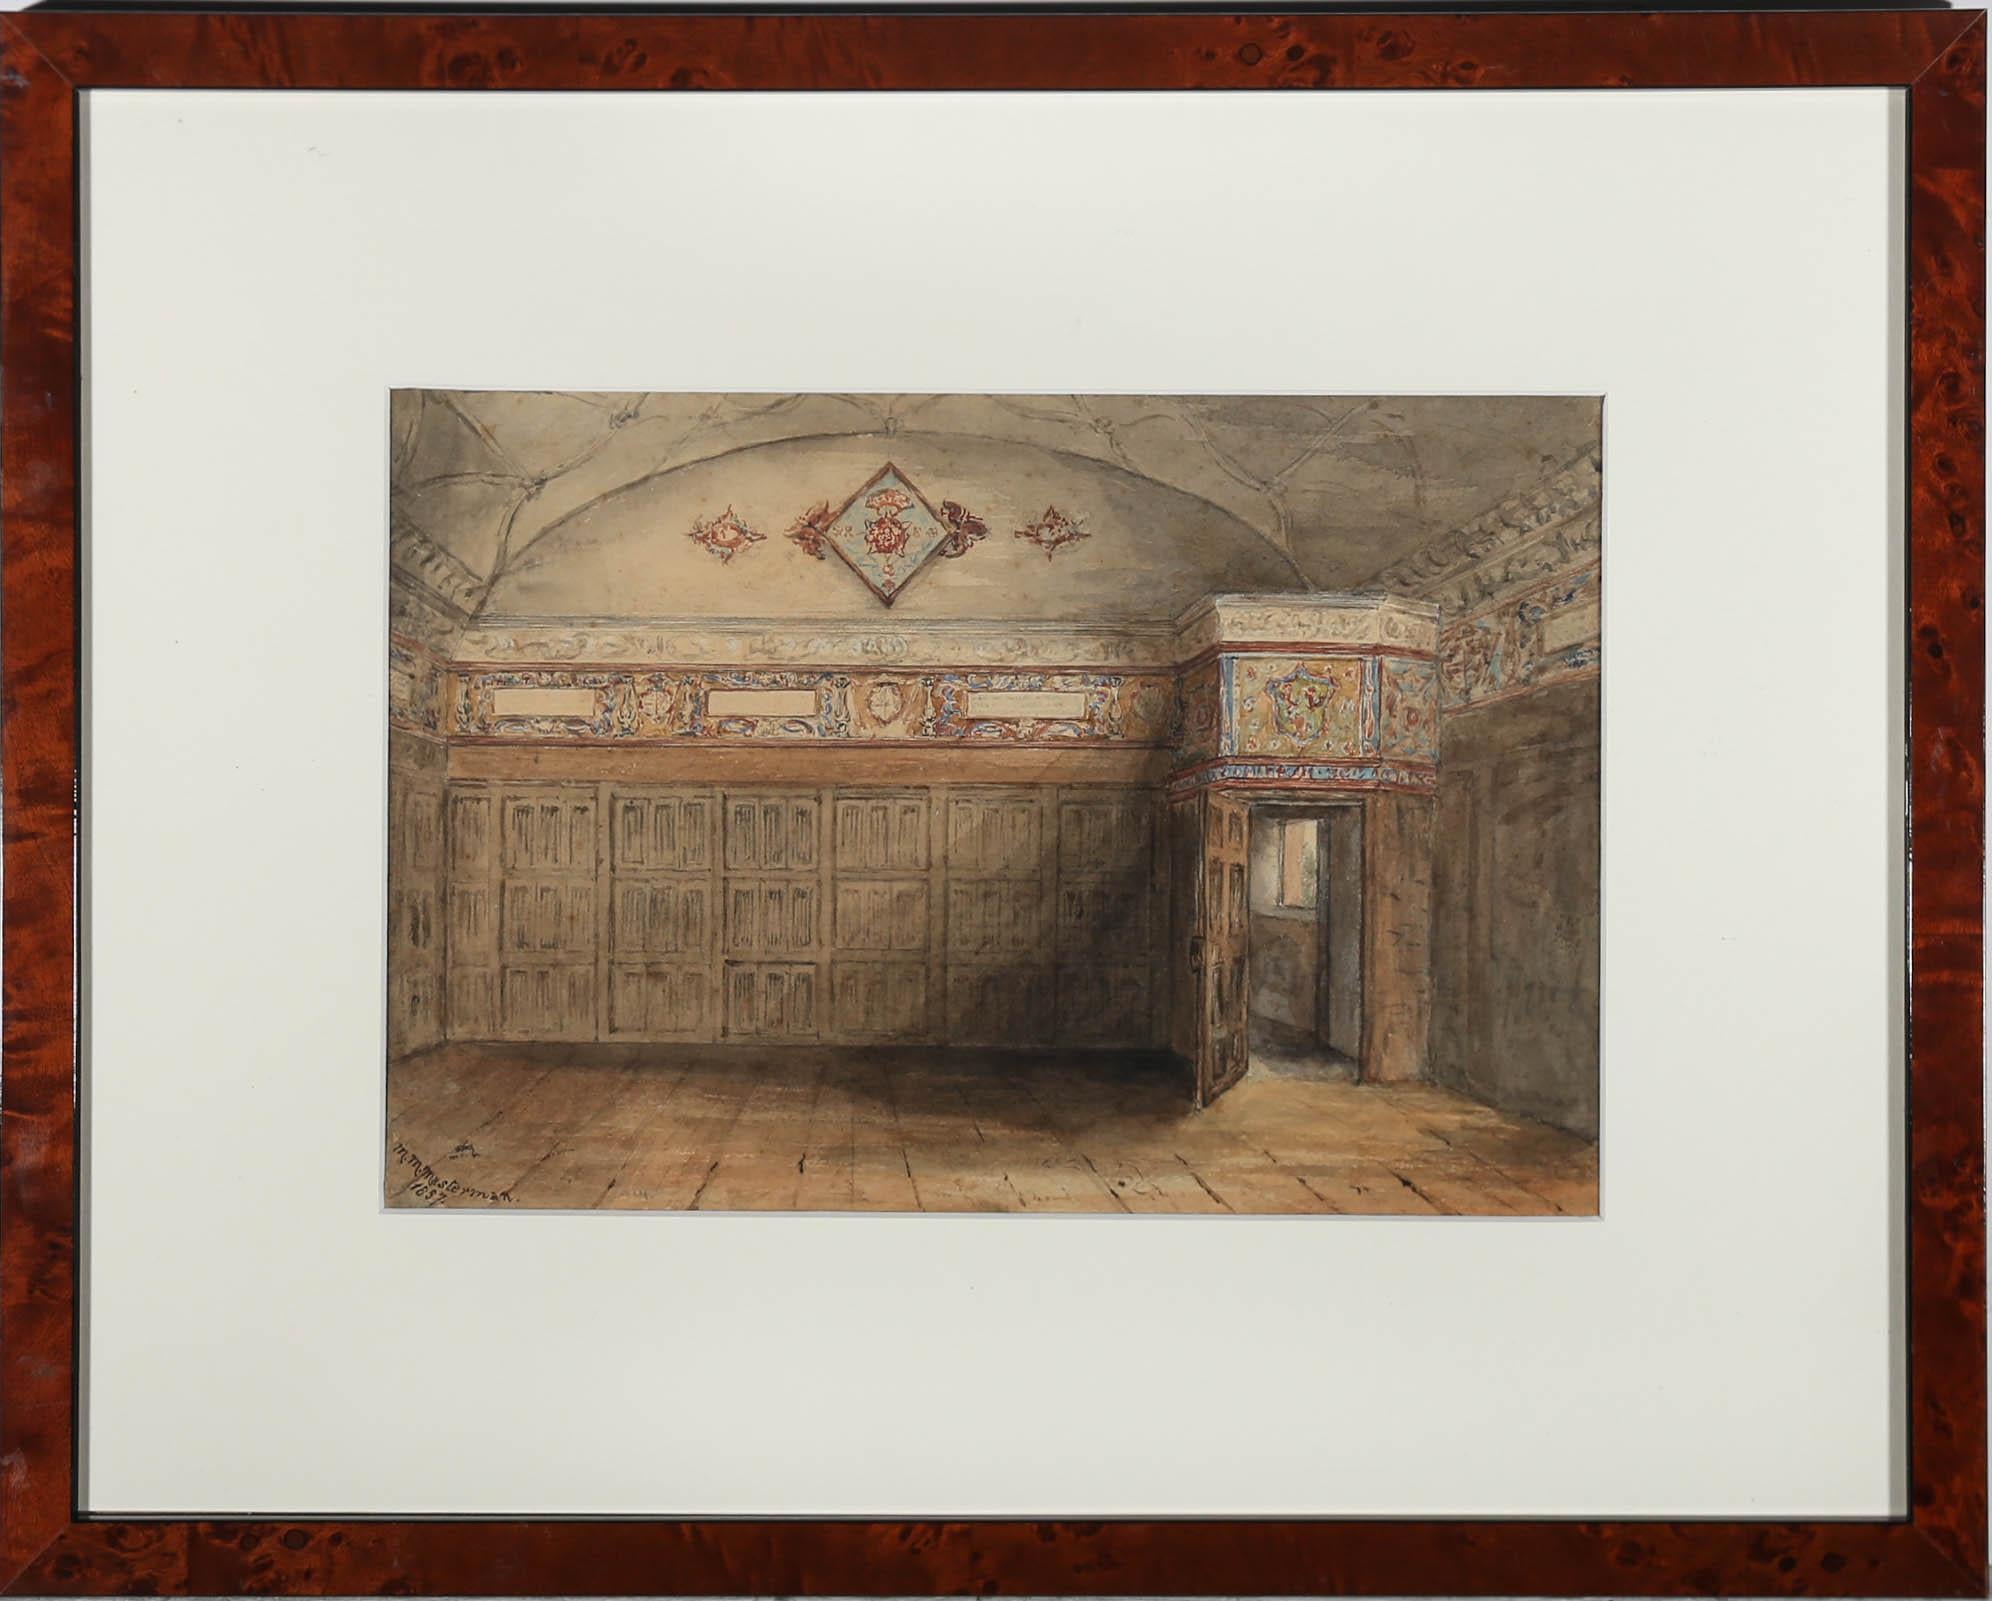 A particularly fine watercolour study of a Jacobean drawing room by Victorian artist M. M. Masterman. The craftsmanship and carpentry of the interior instantly grabs your attention, testament to the artist's consideration to detail and fine